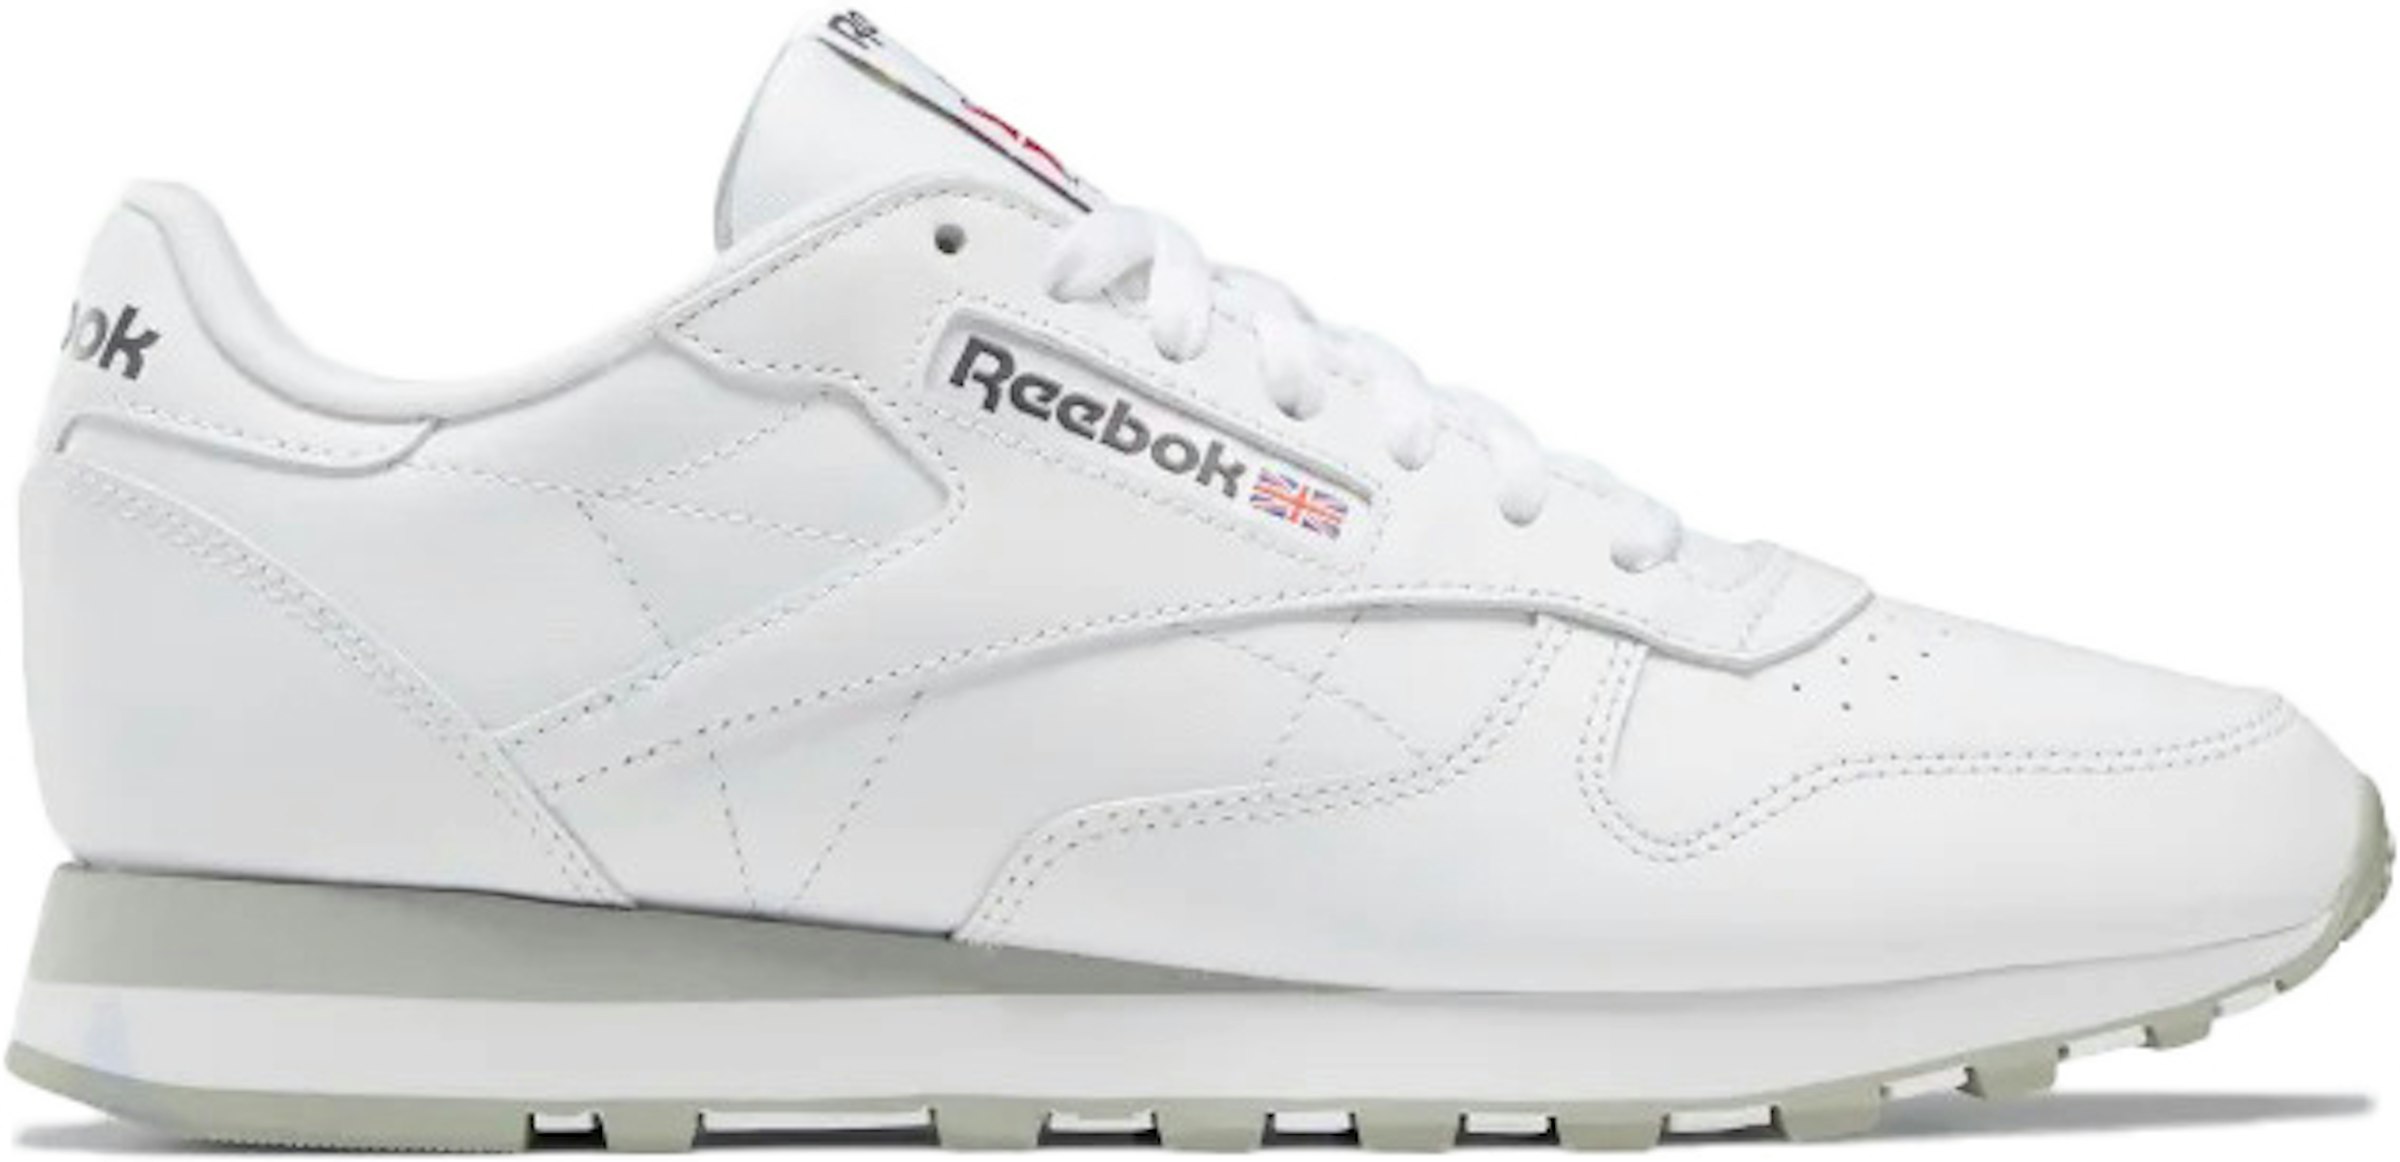 Reebok Leather White Pure Men's - GY3558 - US